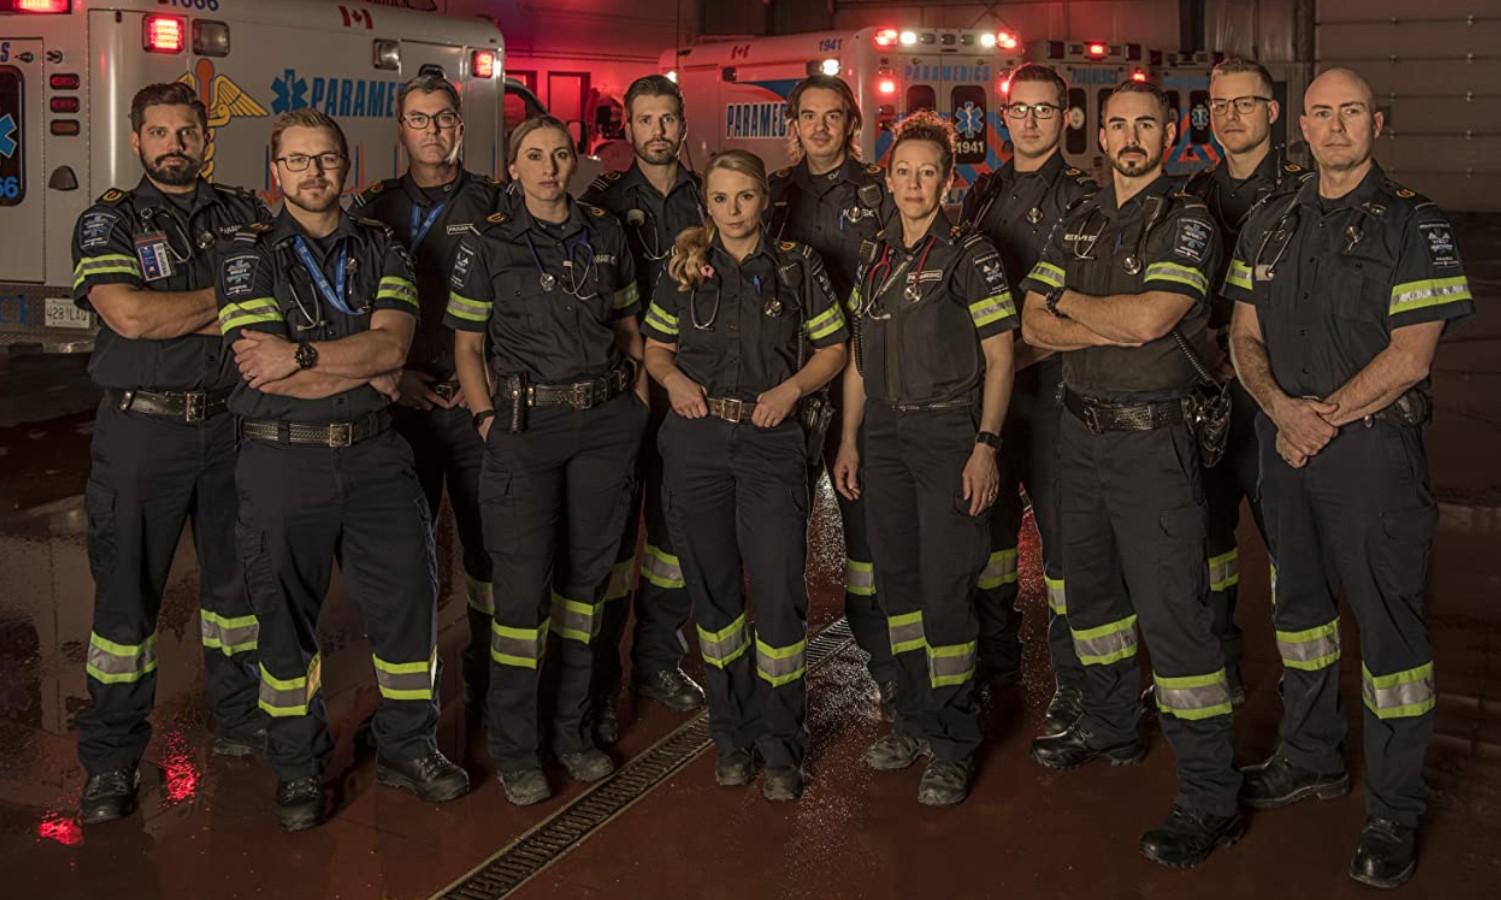 The documentary, which debuted on October 4, 2018, examines the day-to-day activities of paramedics, and medical professionals who mostly serve as part of emergency medical services (EMS) using road ambulances, helicopters, mobile intensive care ambulances (MICA), and motorbikes.